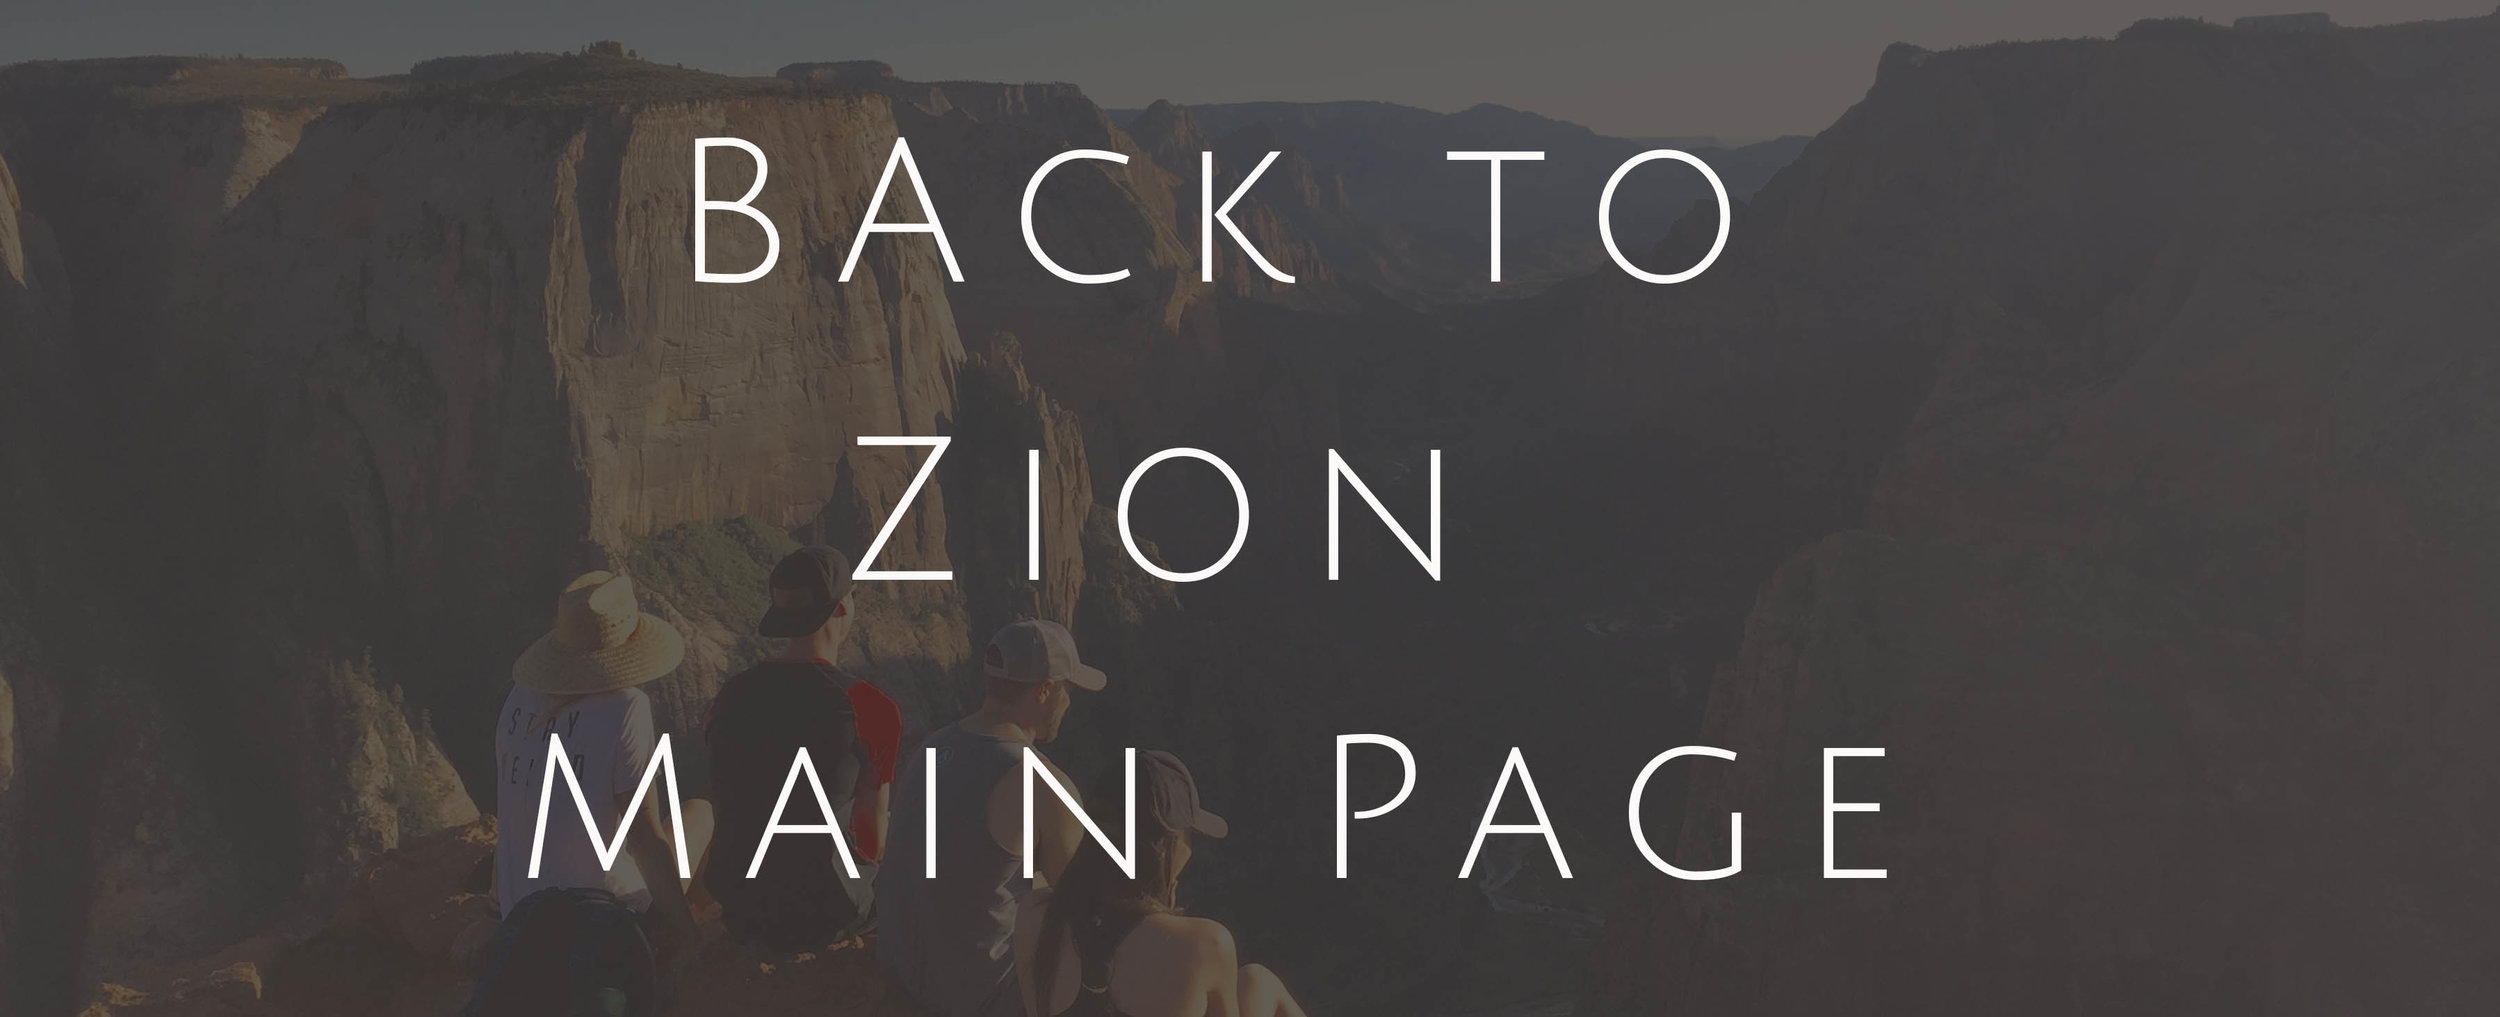 Back to Zion Main Page 2.2.jpg